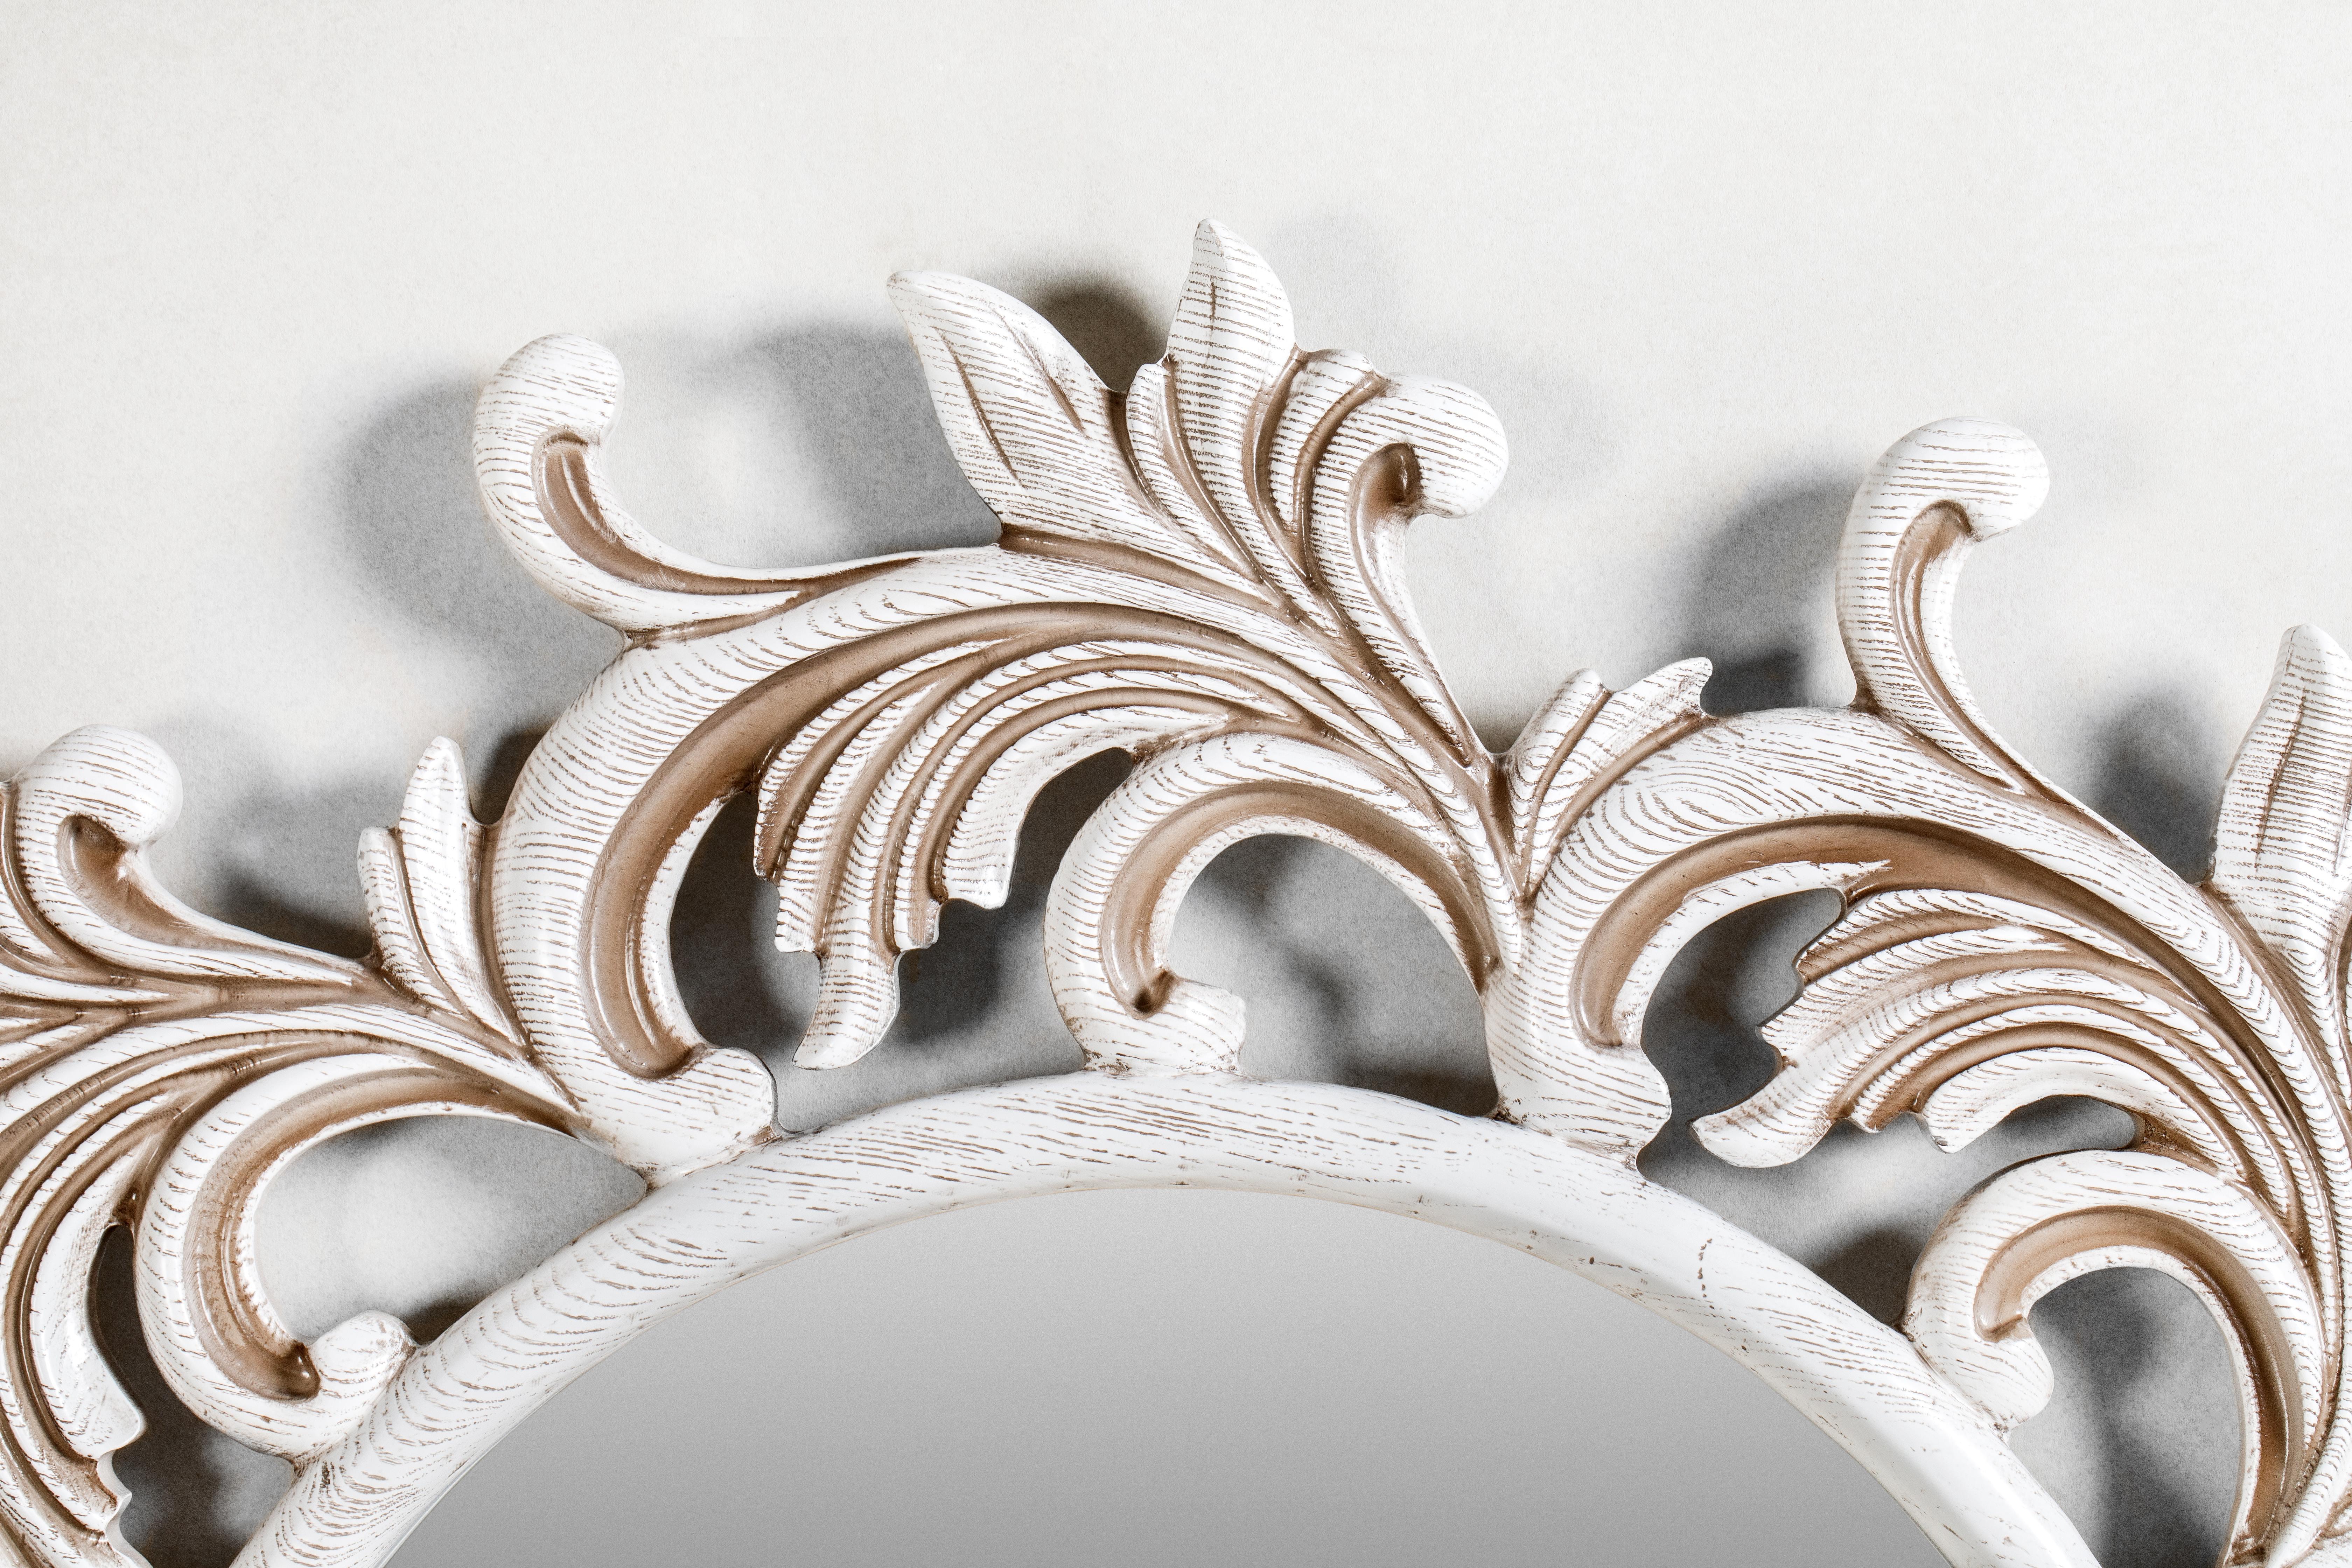 Open up your space with the Florence Wall Mirror. A round frame with detailed carvings surrounding the central mirror, adding a stylish texture to your entrance or living room. This Florence Mirror is both functional and decorative, and can be used